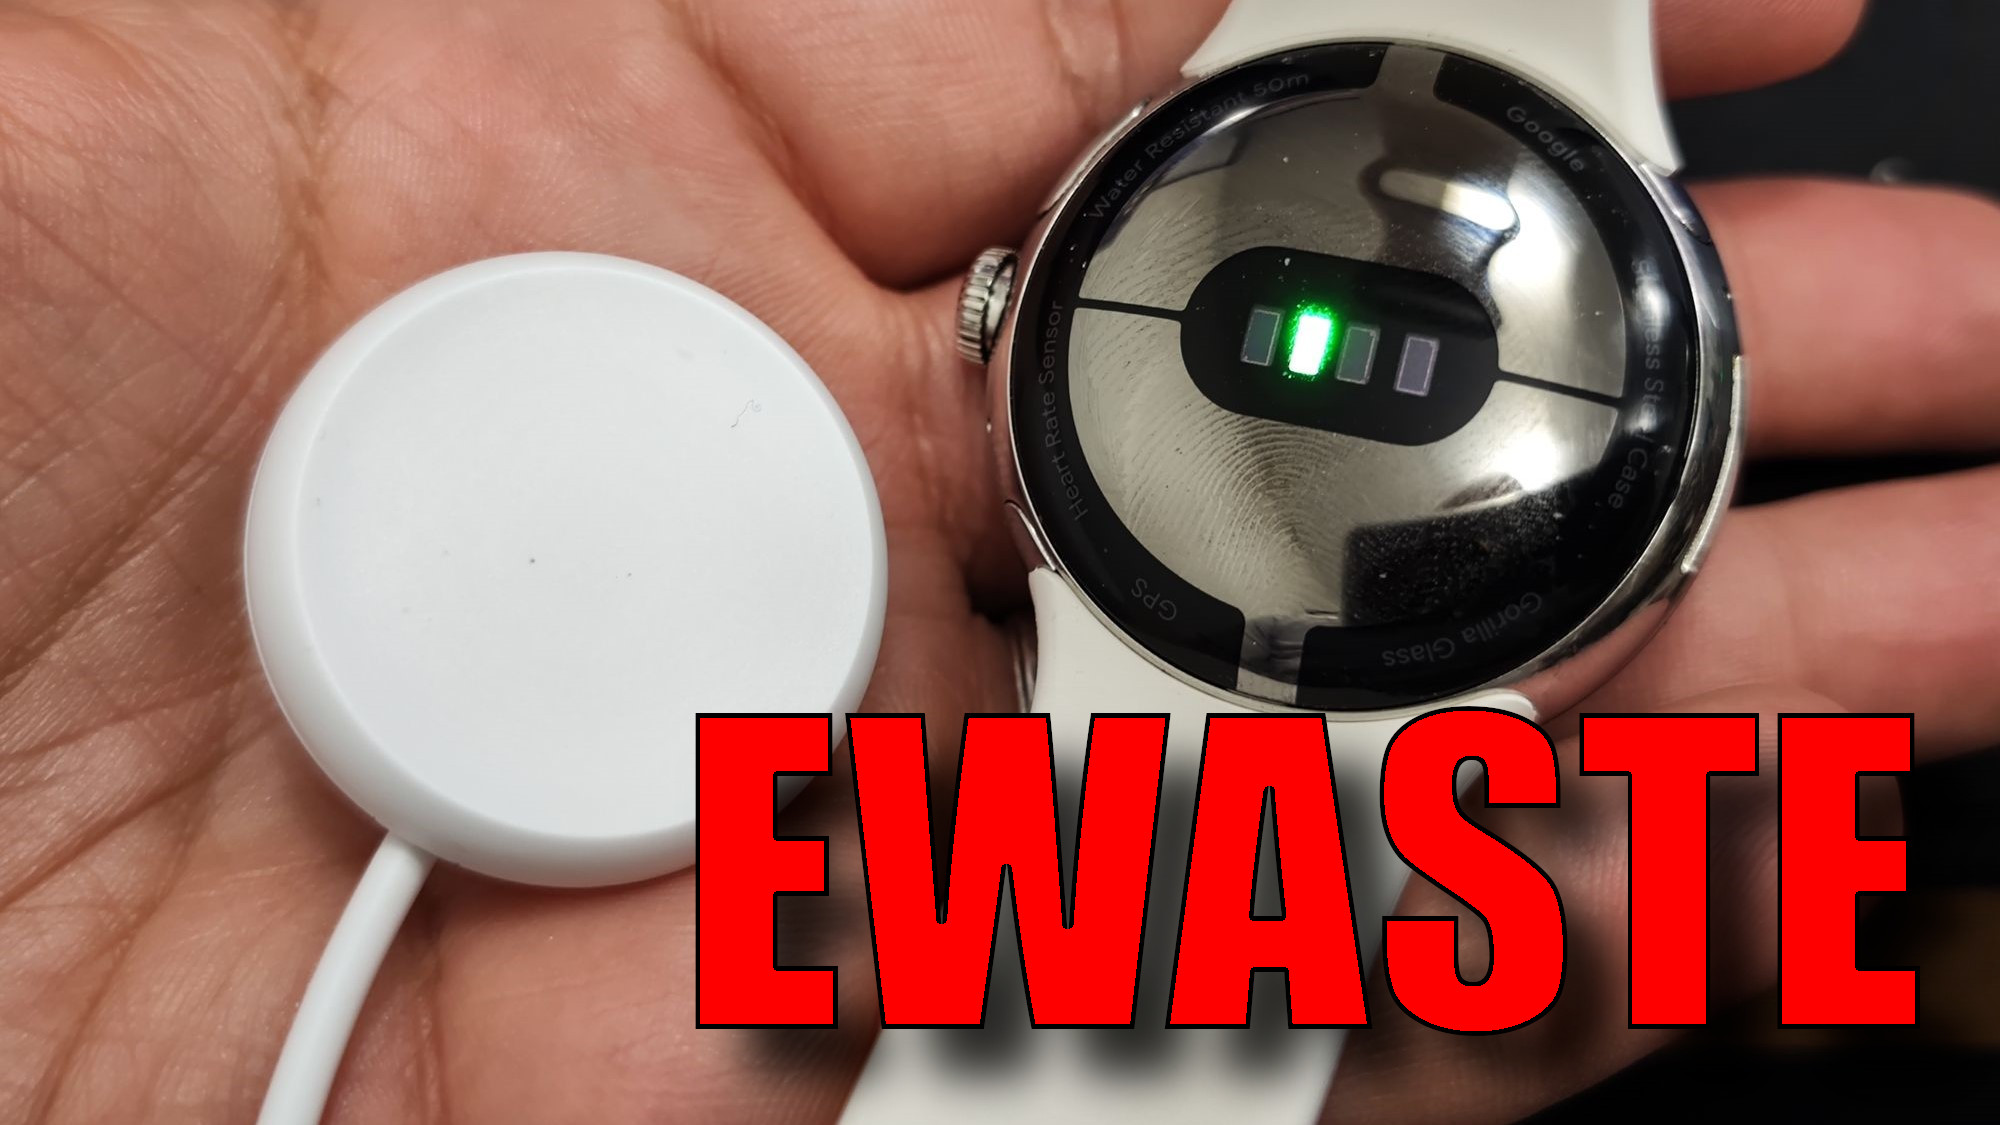 E Waste: My biggest problem with the Pixel Watch is the charger